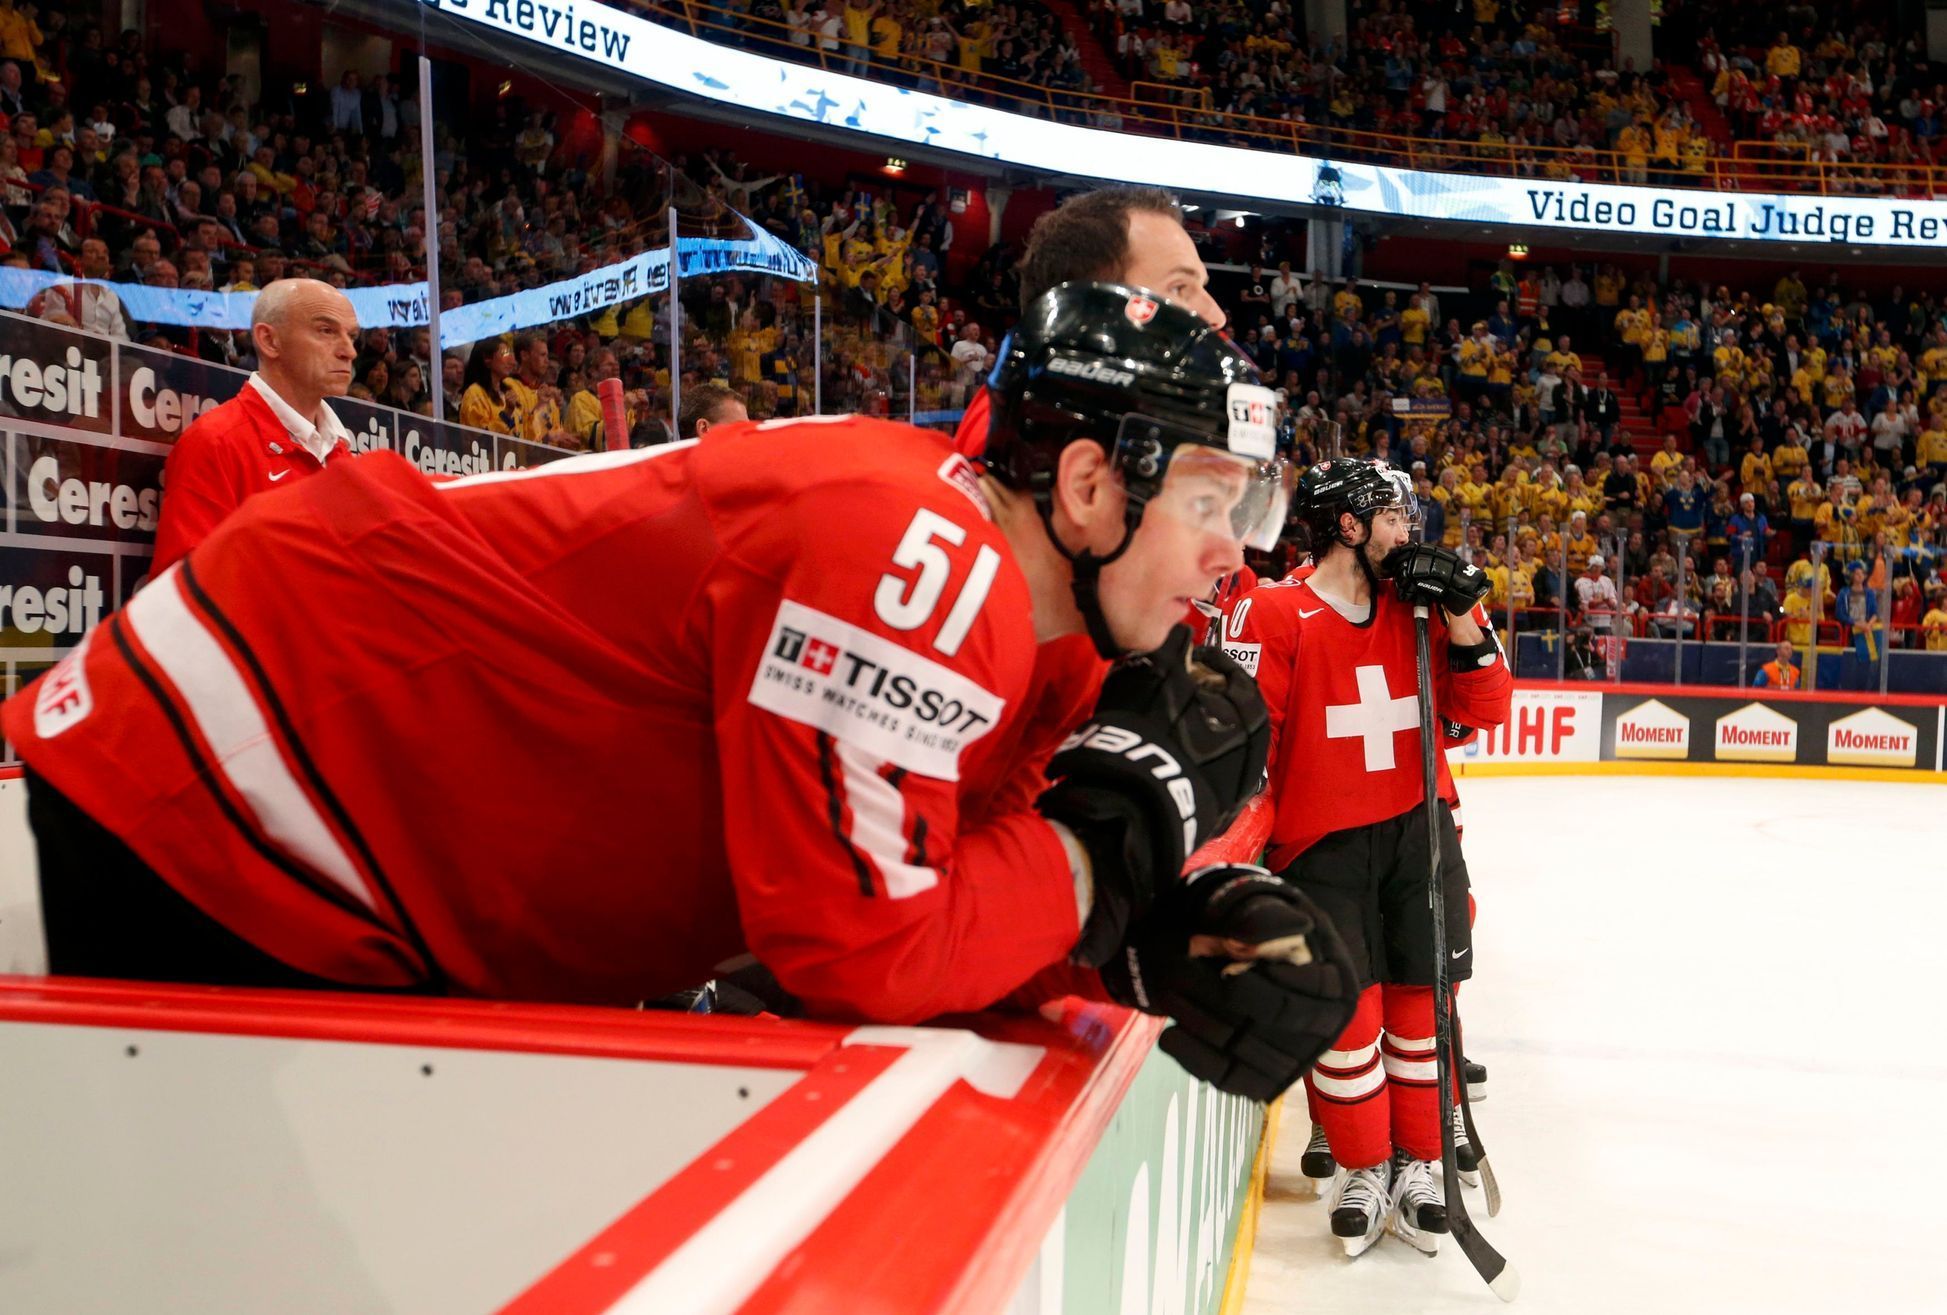 Switzerland's players react after their loss to Sweden in th